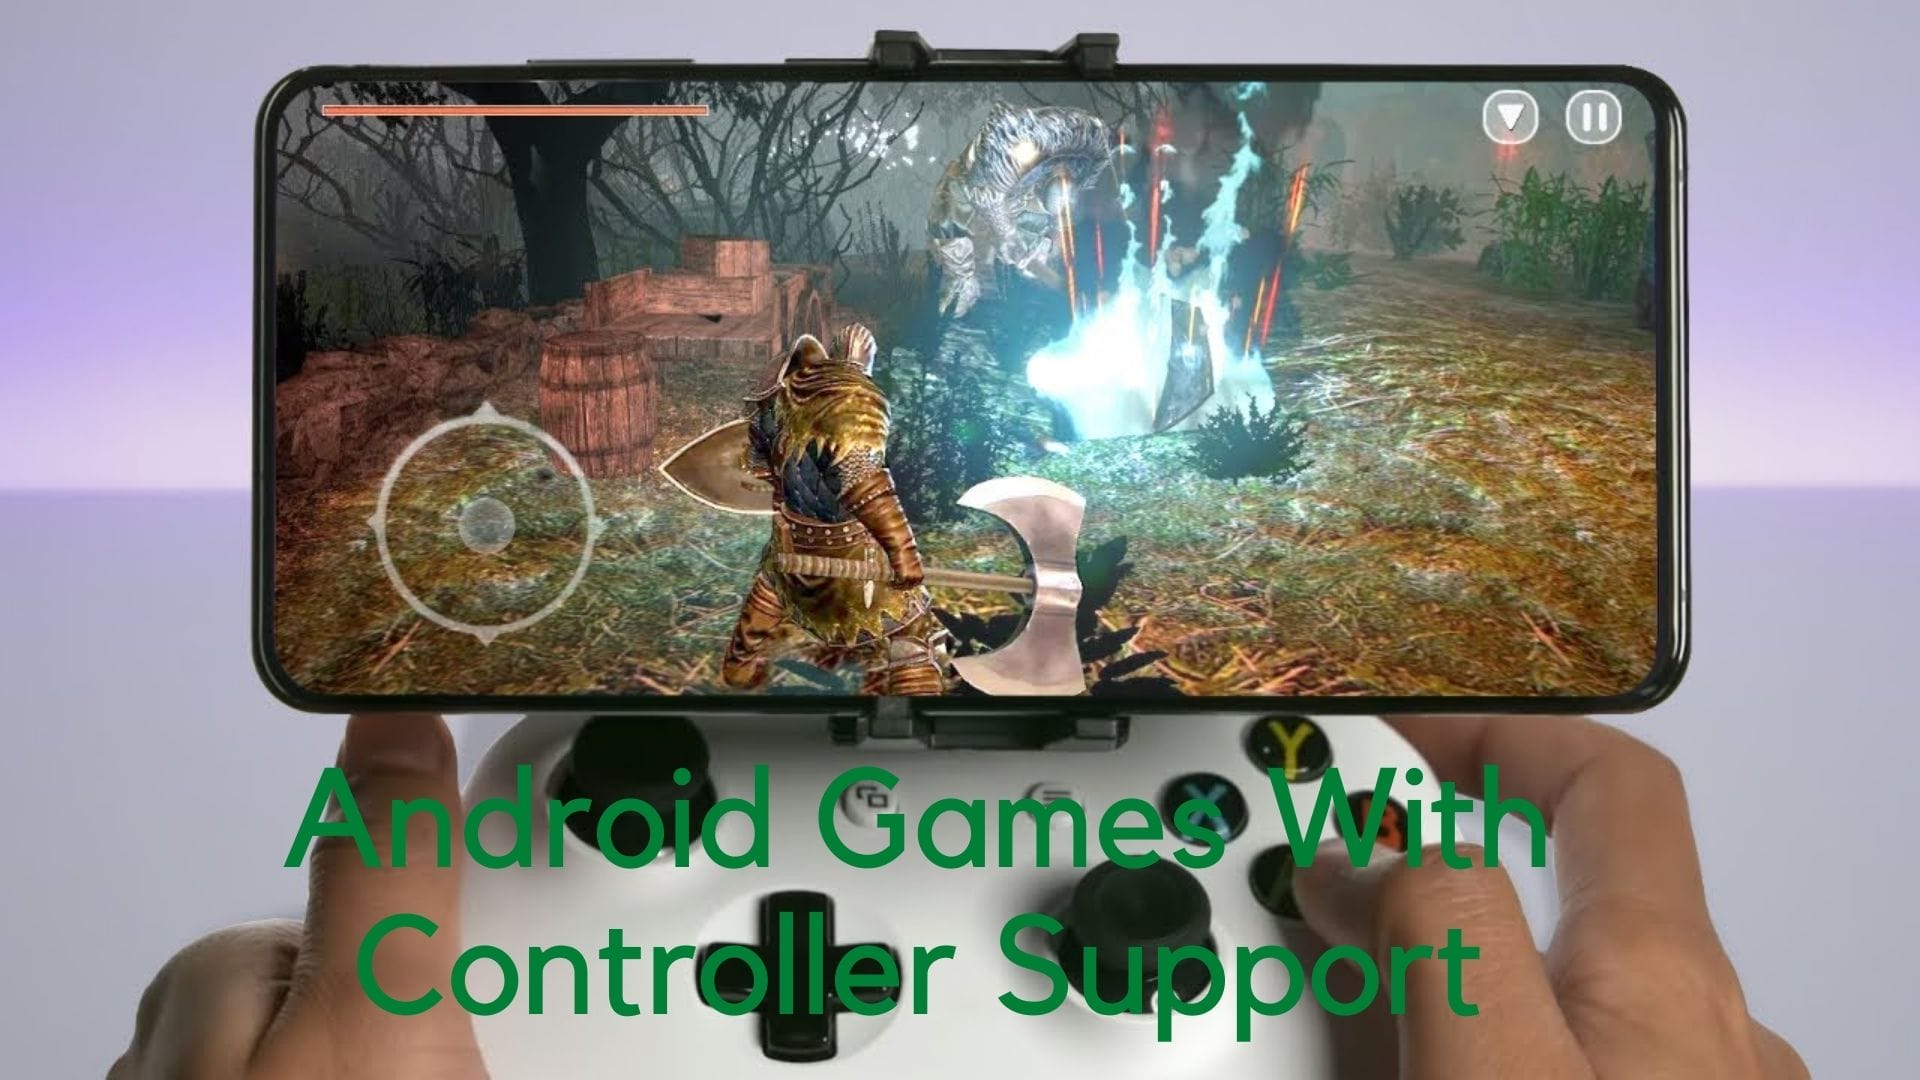  Android Games With Controller Support In Each Category.